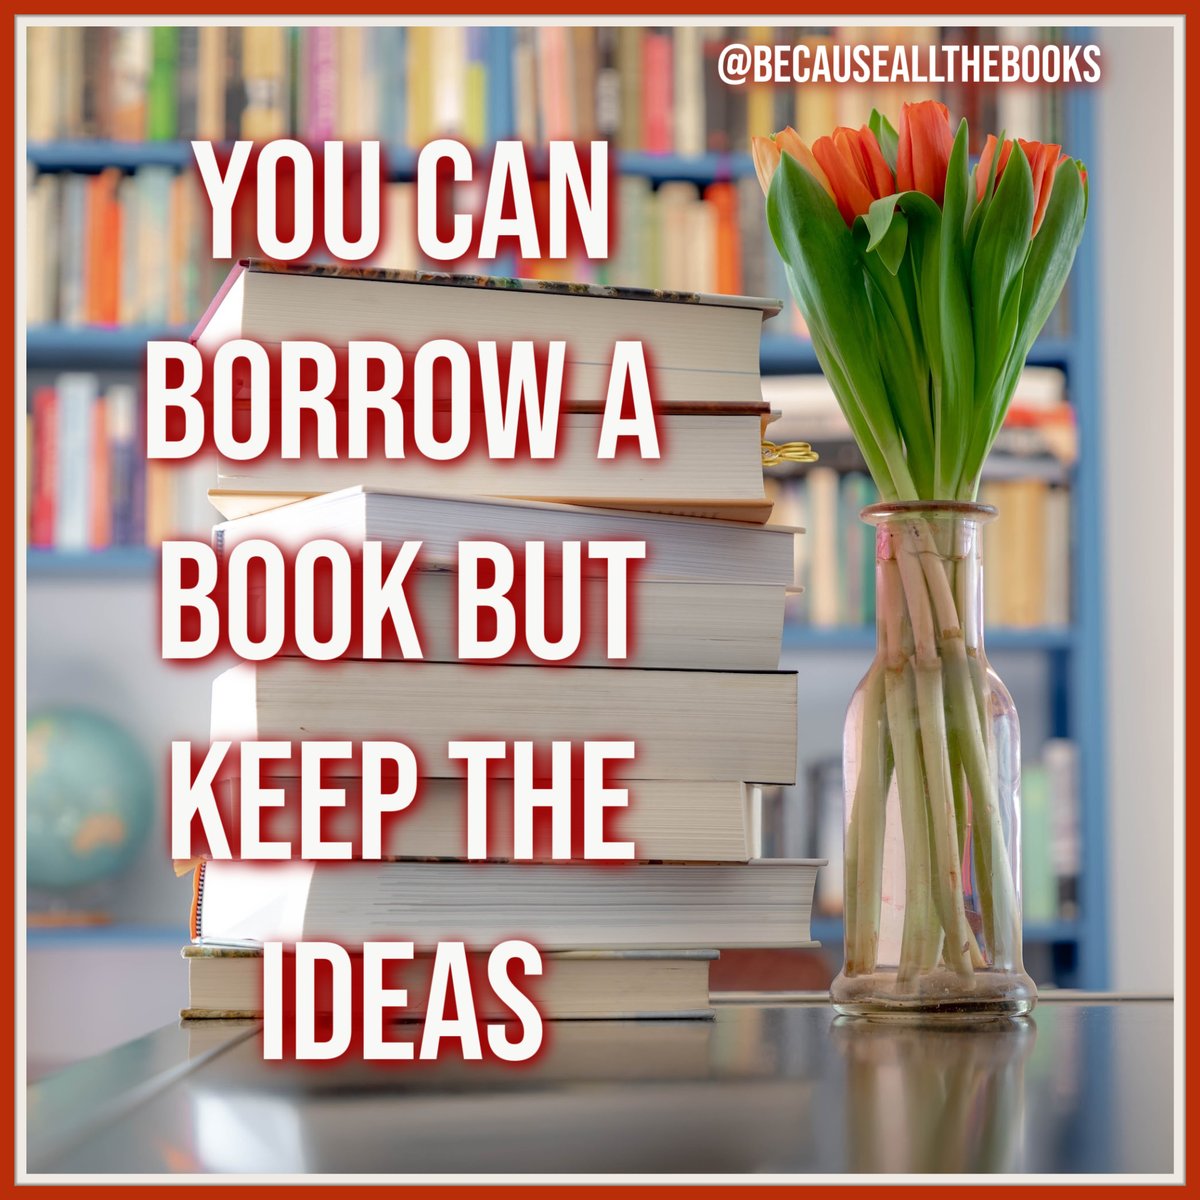 Reading = Learning

#BecauseAllTheBooks #BookWormLife #BookJoy #BooksAreLife #BooksAreEssential #BooksAreTheBest